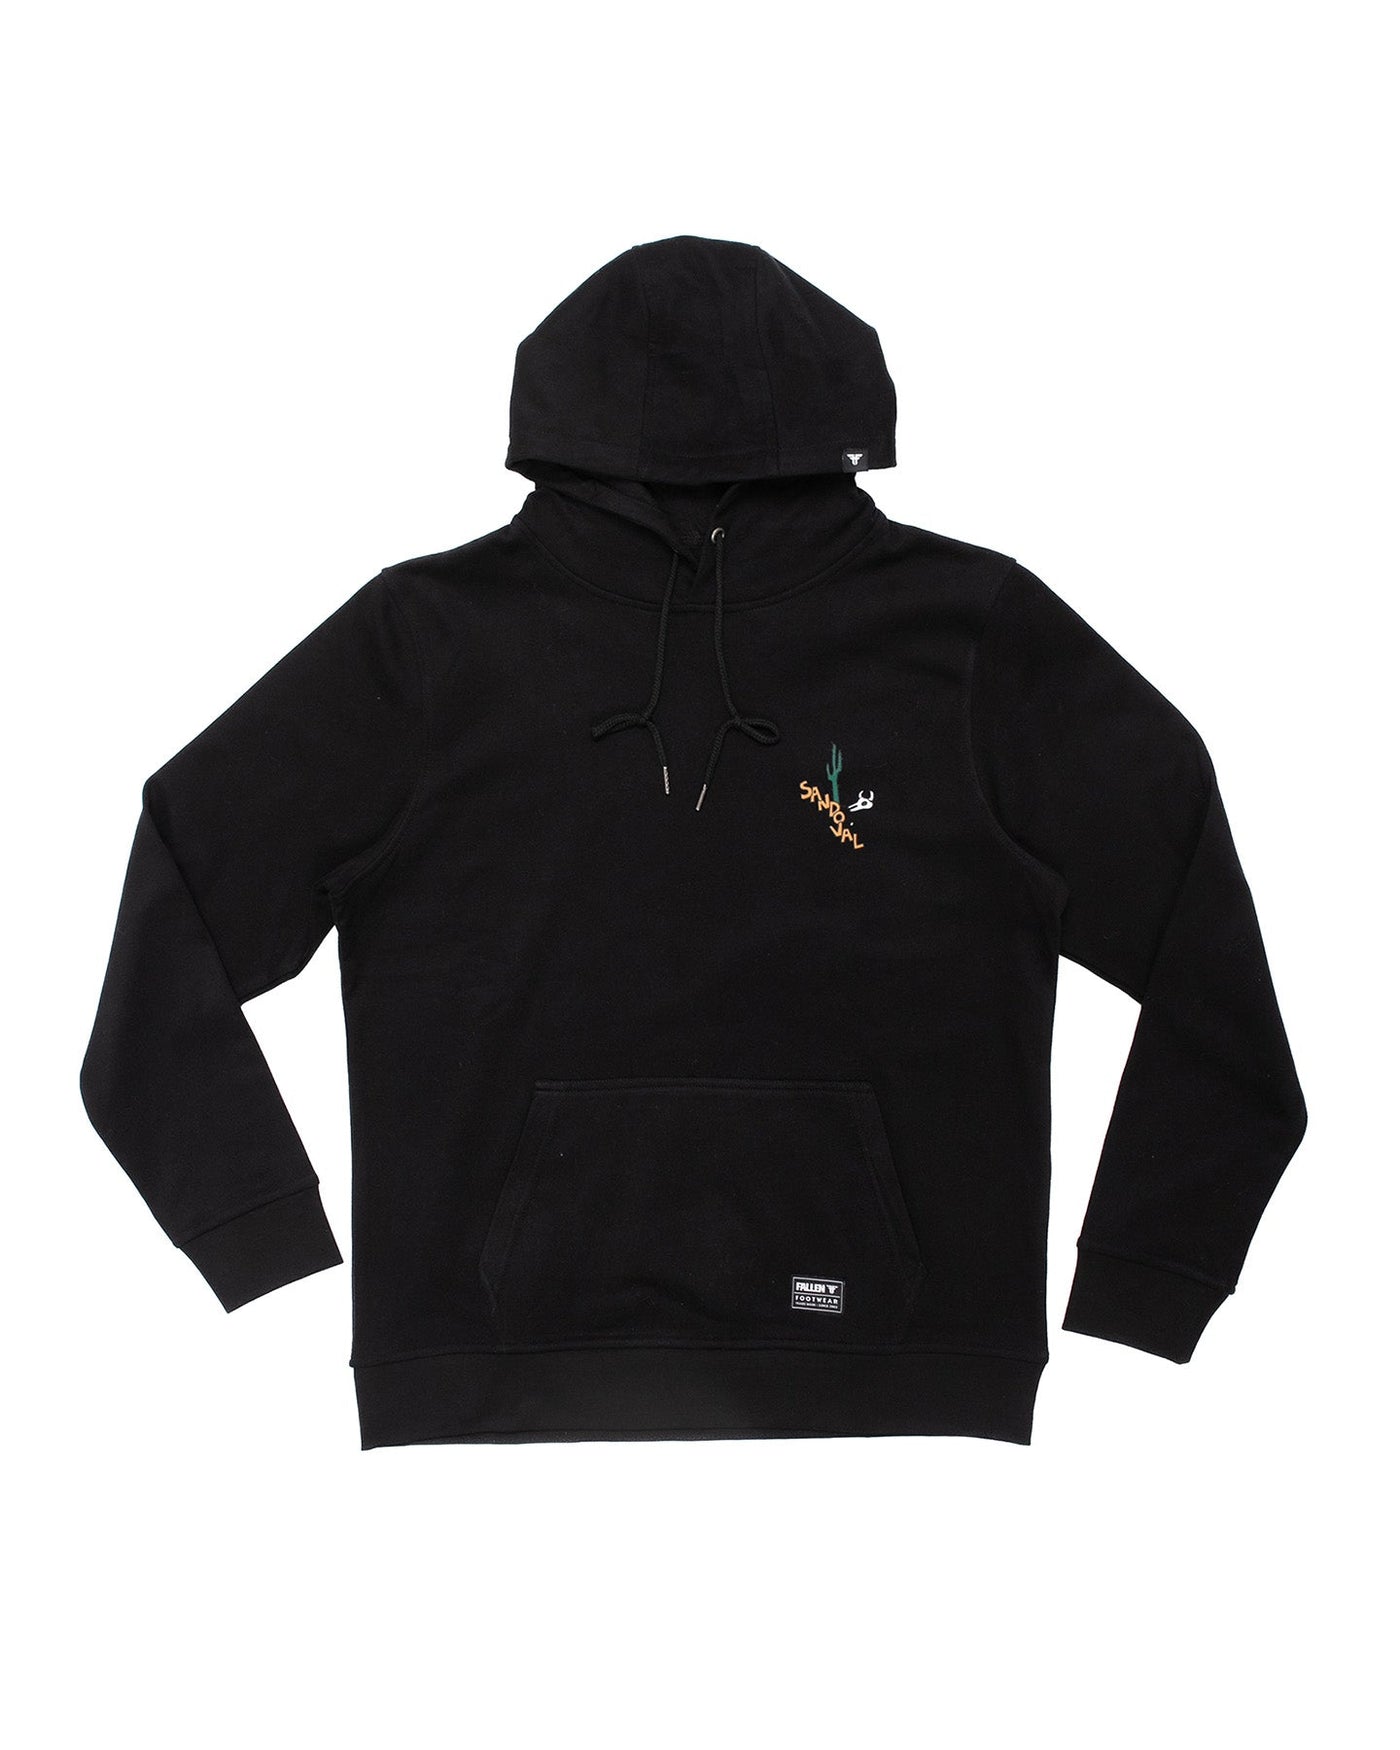 THE WANDERER HOODIE - BLACK / YELLOW (TOMMY SANDOVAL)